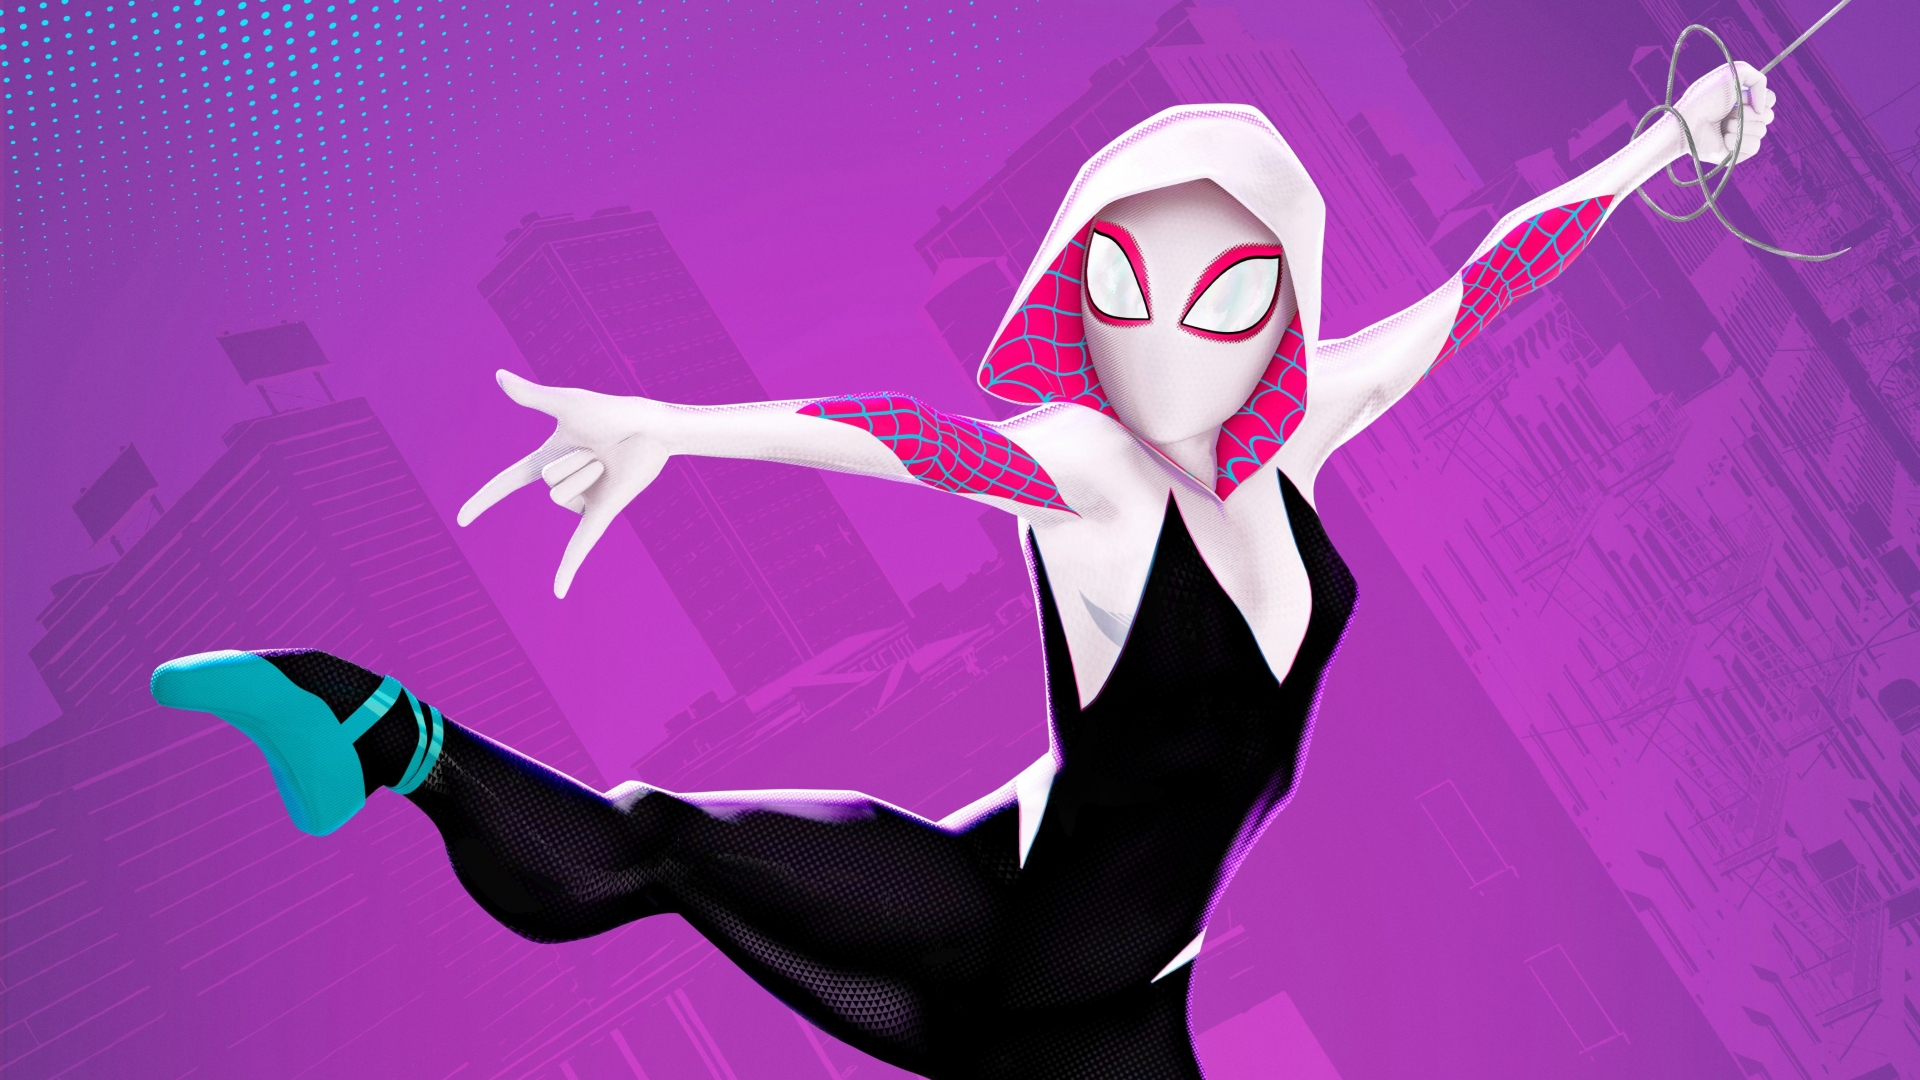 Exclusive: Kevin Feige Wants Spider-Gwen In Two Major Marvel